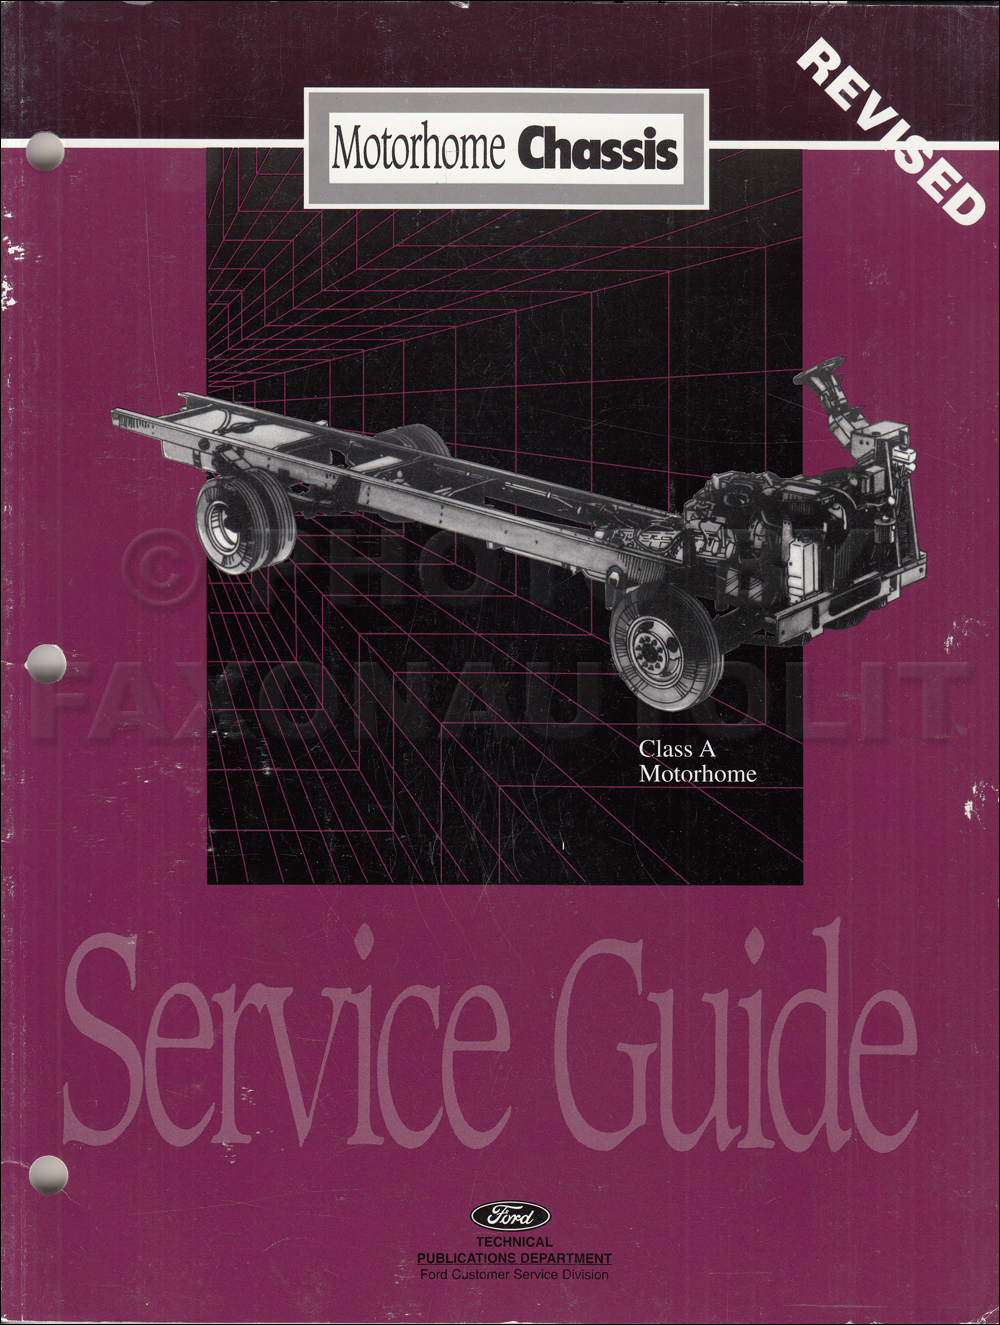 1996-1997 Ford Motorhome Chassis Service Guide Original REVISED